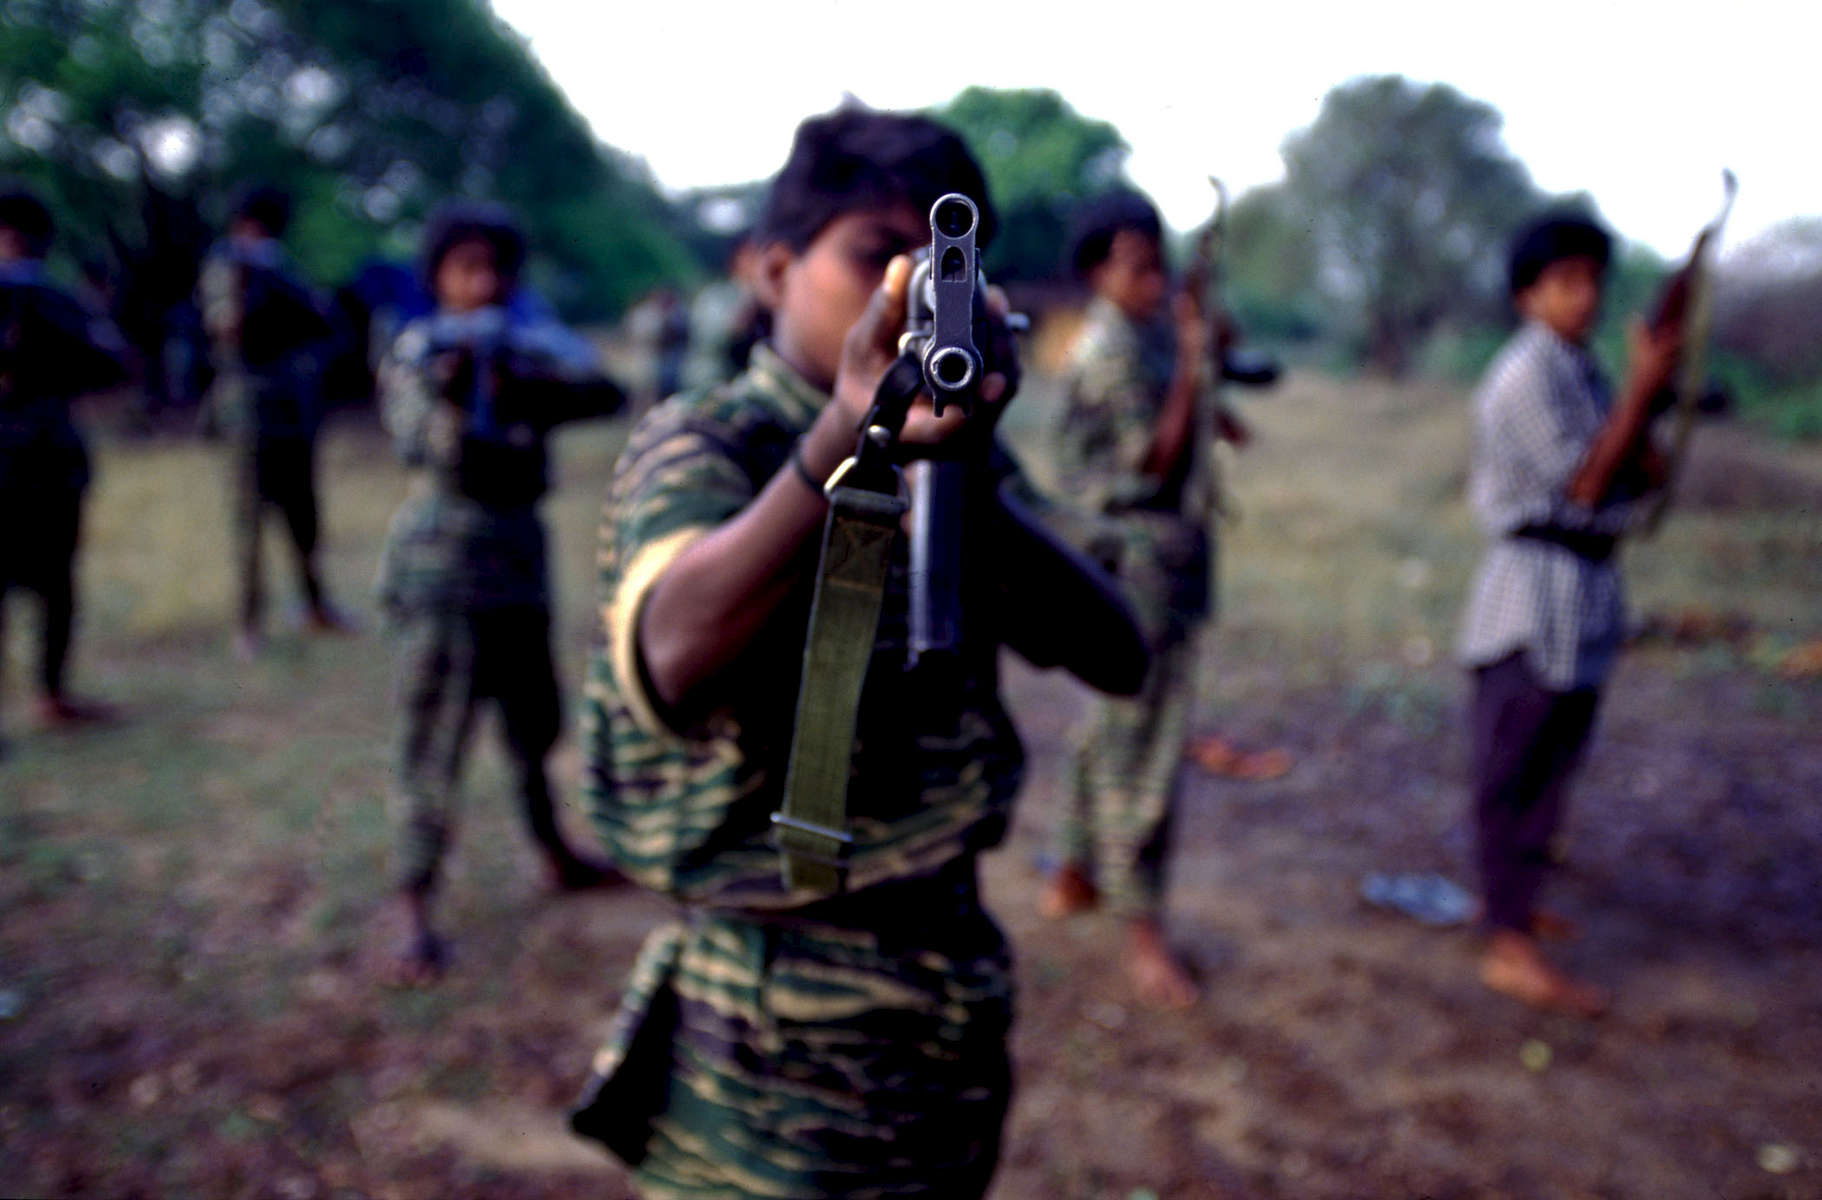 Female Tamil Tiger fighter during small arms training in the northern Vanni region in Sri Lanka. In 1984, eligible female fighters were assembled in the jungles of Tamil Nadu, India, for training, and  from 1987 to 1995 on Jaffna Peninsula. Their first involvement in battle took place in October '86 in the Mannar region. Since the mid eighties, their military training and involvement has evolved into a highly sophisticated autonomous military unit of the Liberation Tigers of Tamil Eelam (LTTE). 1998